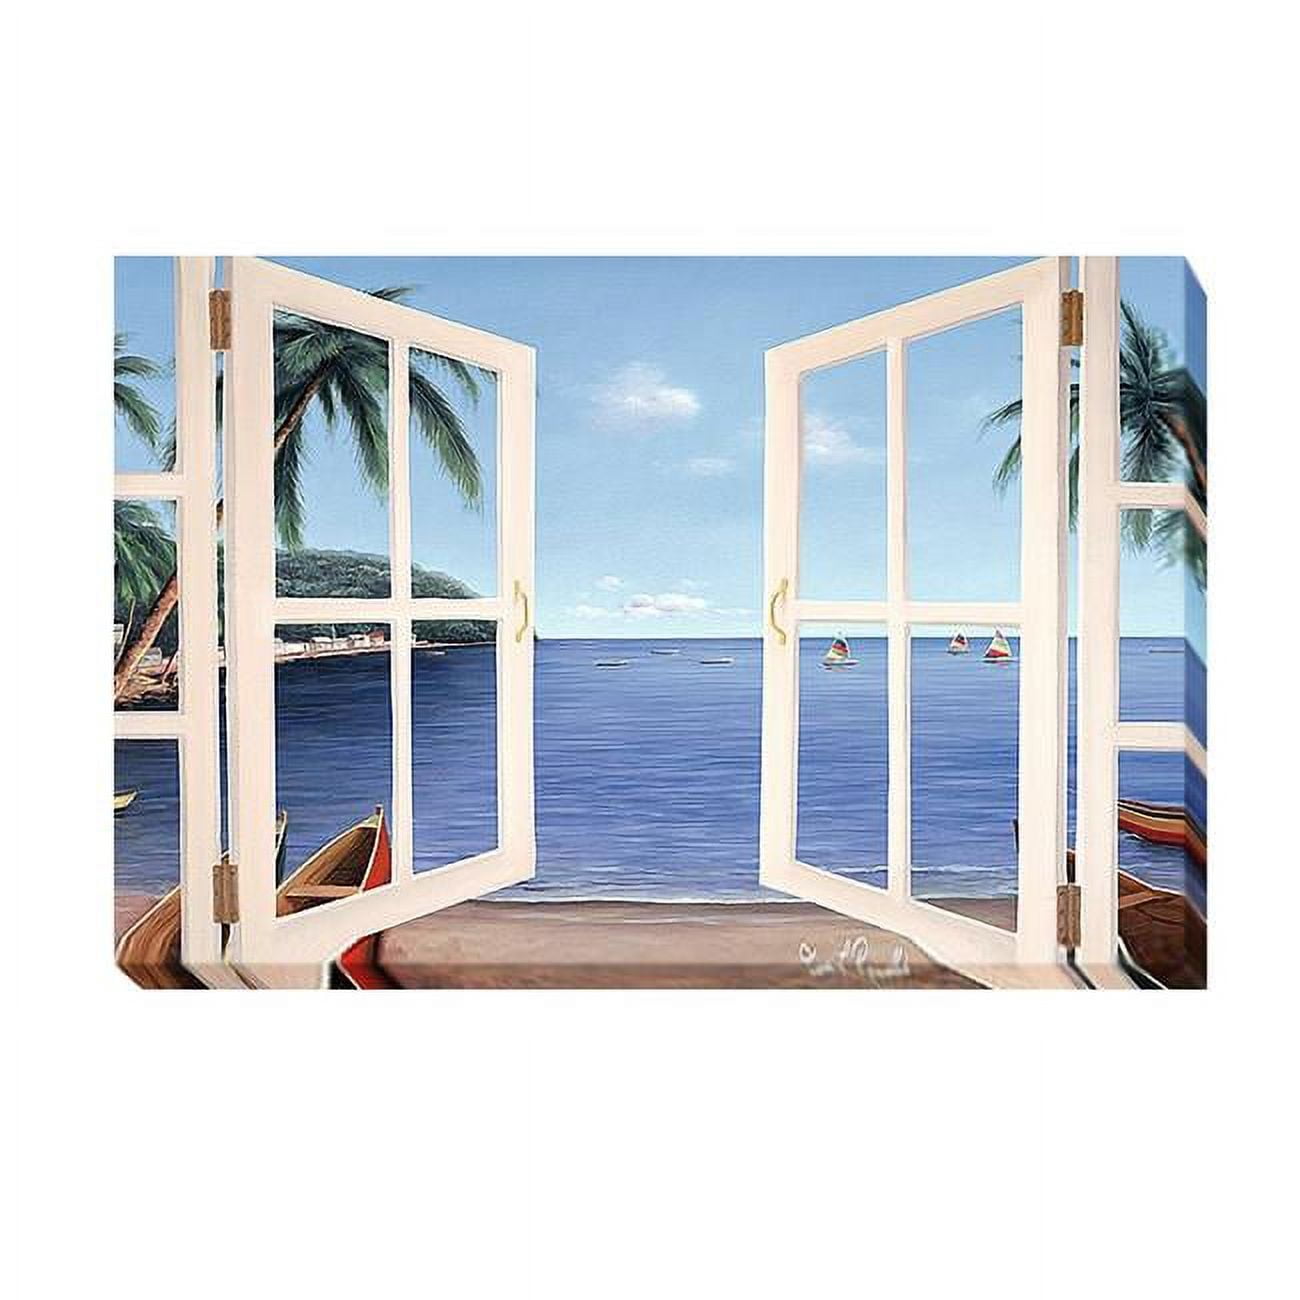 Day Dreams Window By Diane Romanello Premium Gallery-wrapped Canvas Giclee Art - 16 X 24 X 1.5 In.